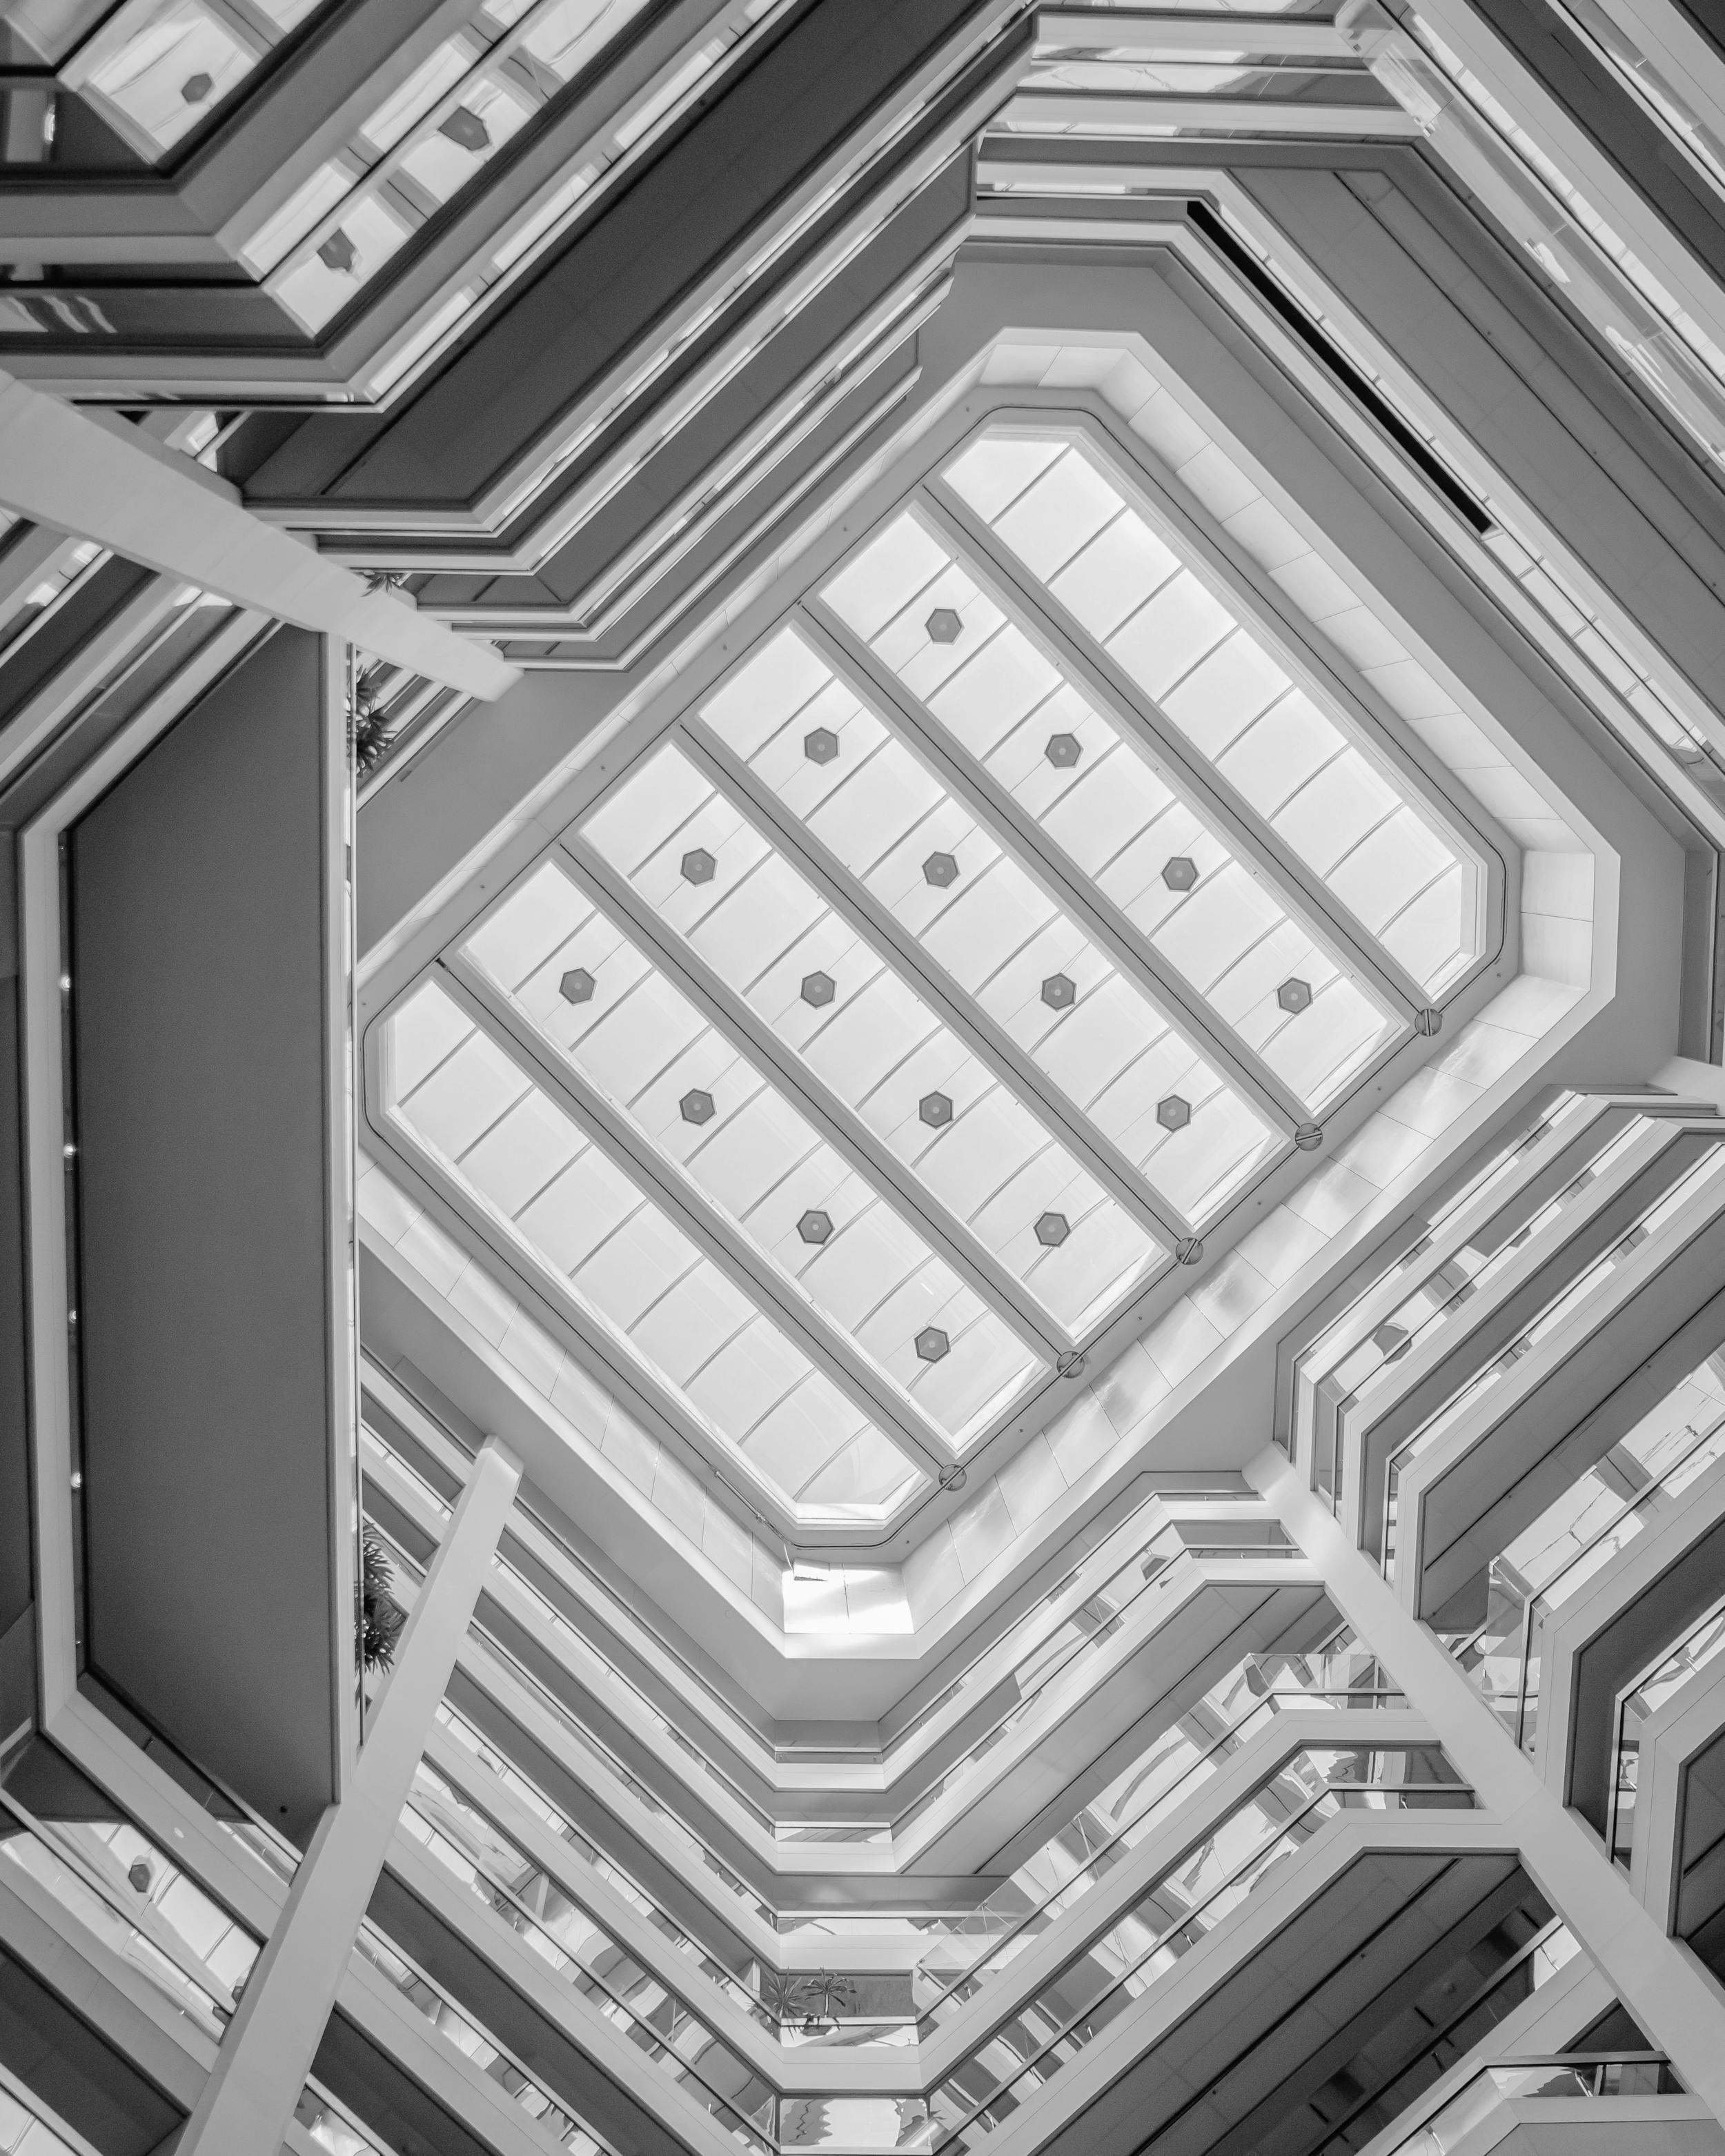 view of ceiling of a tall multi-floor building